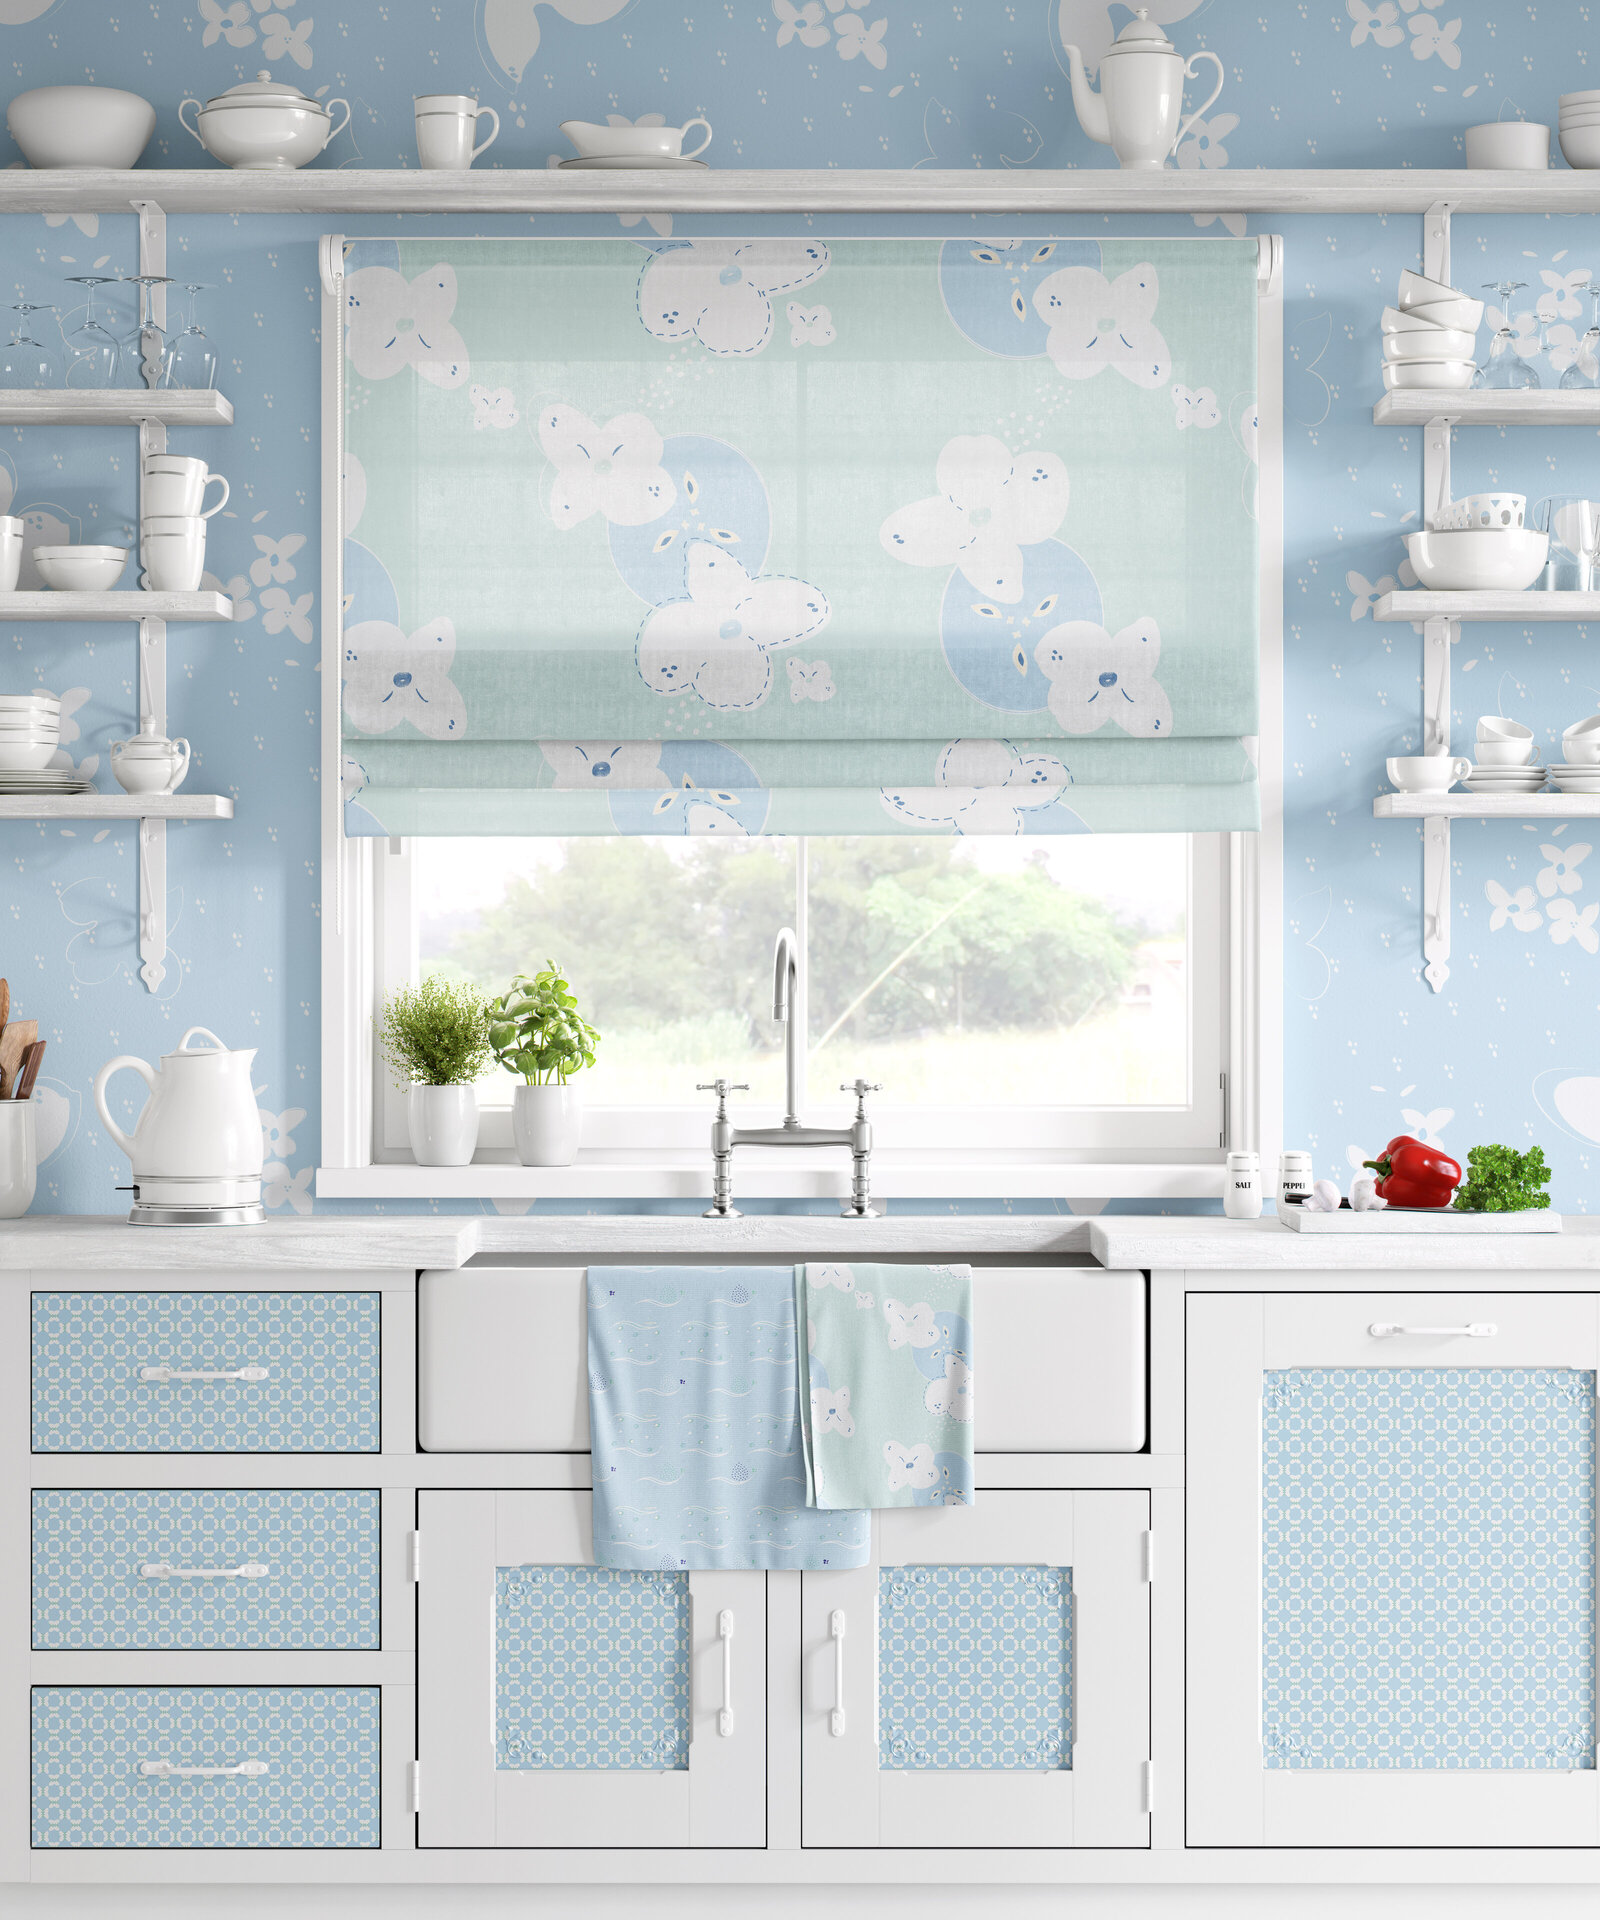 Blue and white kitchen with patterned window shade and napkins